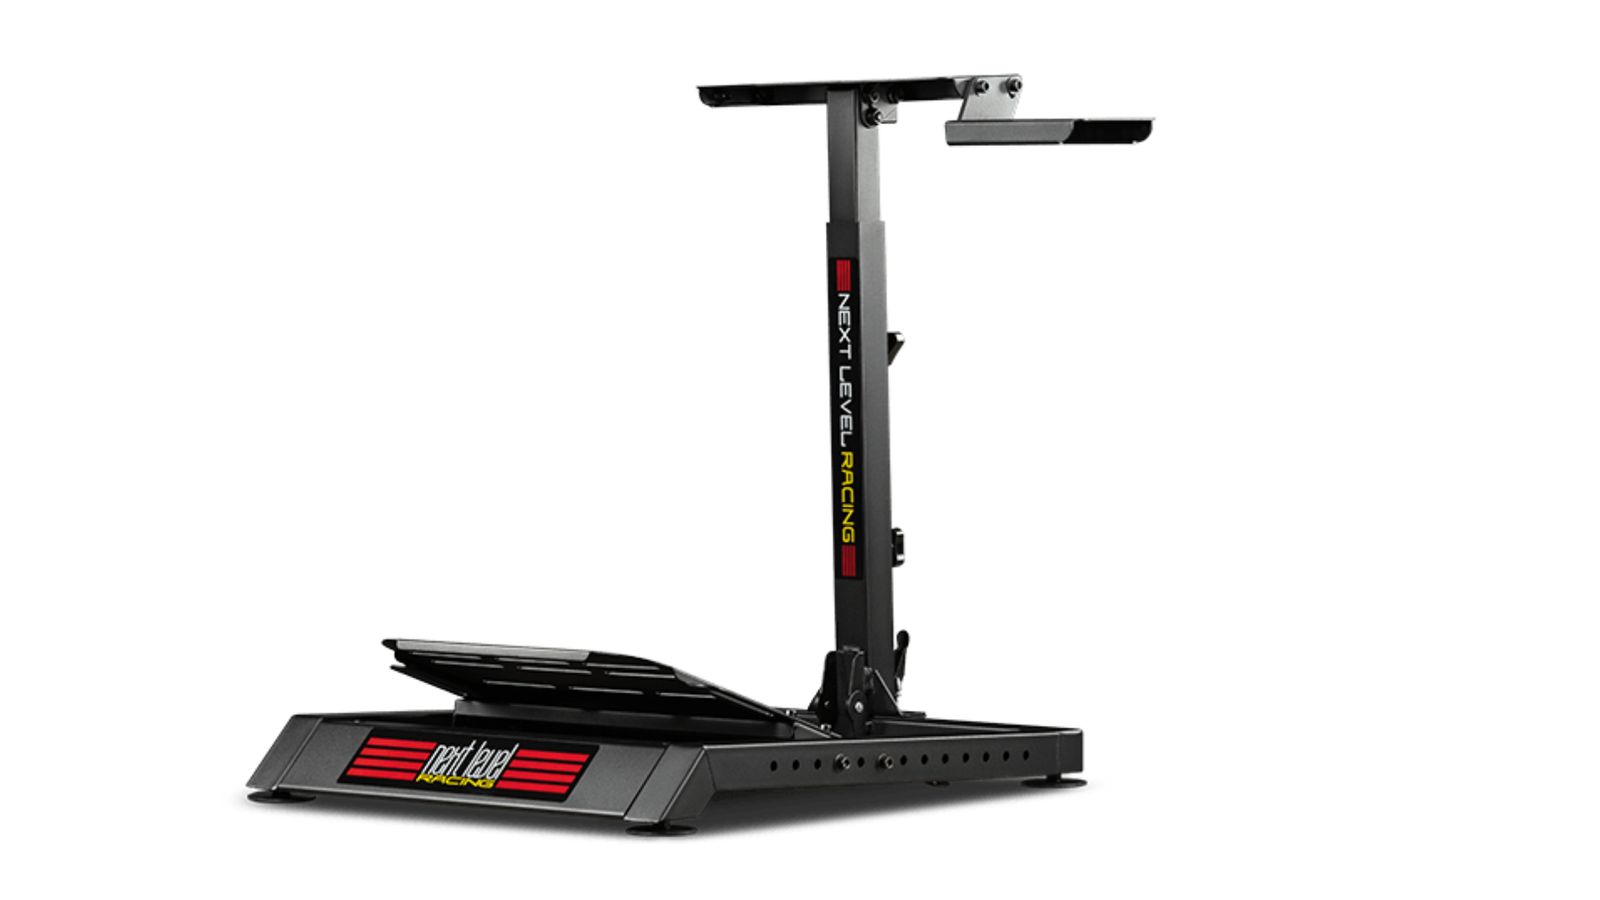 Next Level Racing Wheel Stand Lite product image of a black stand with red, white, and yellow branding.